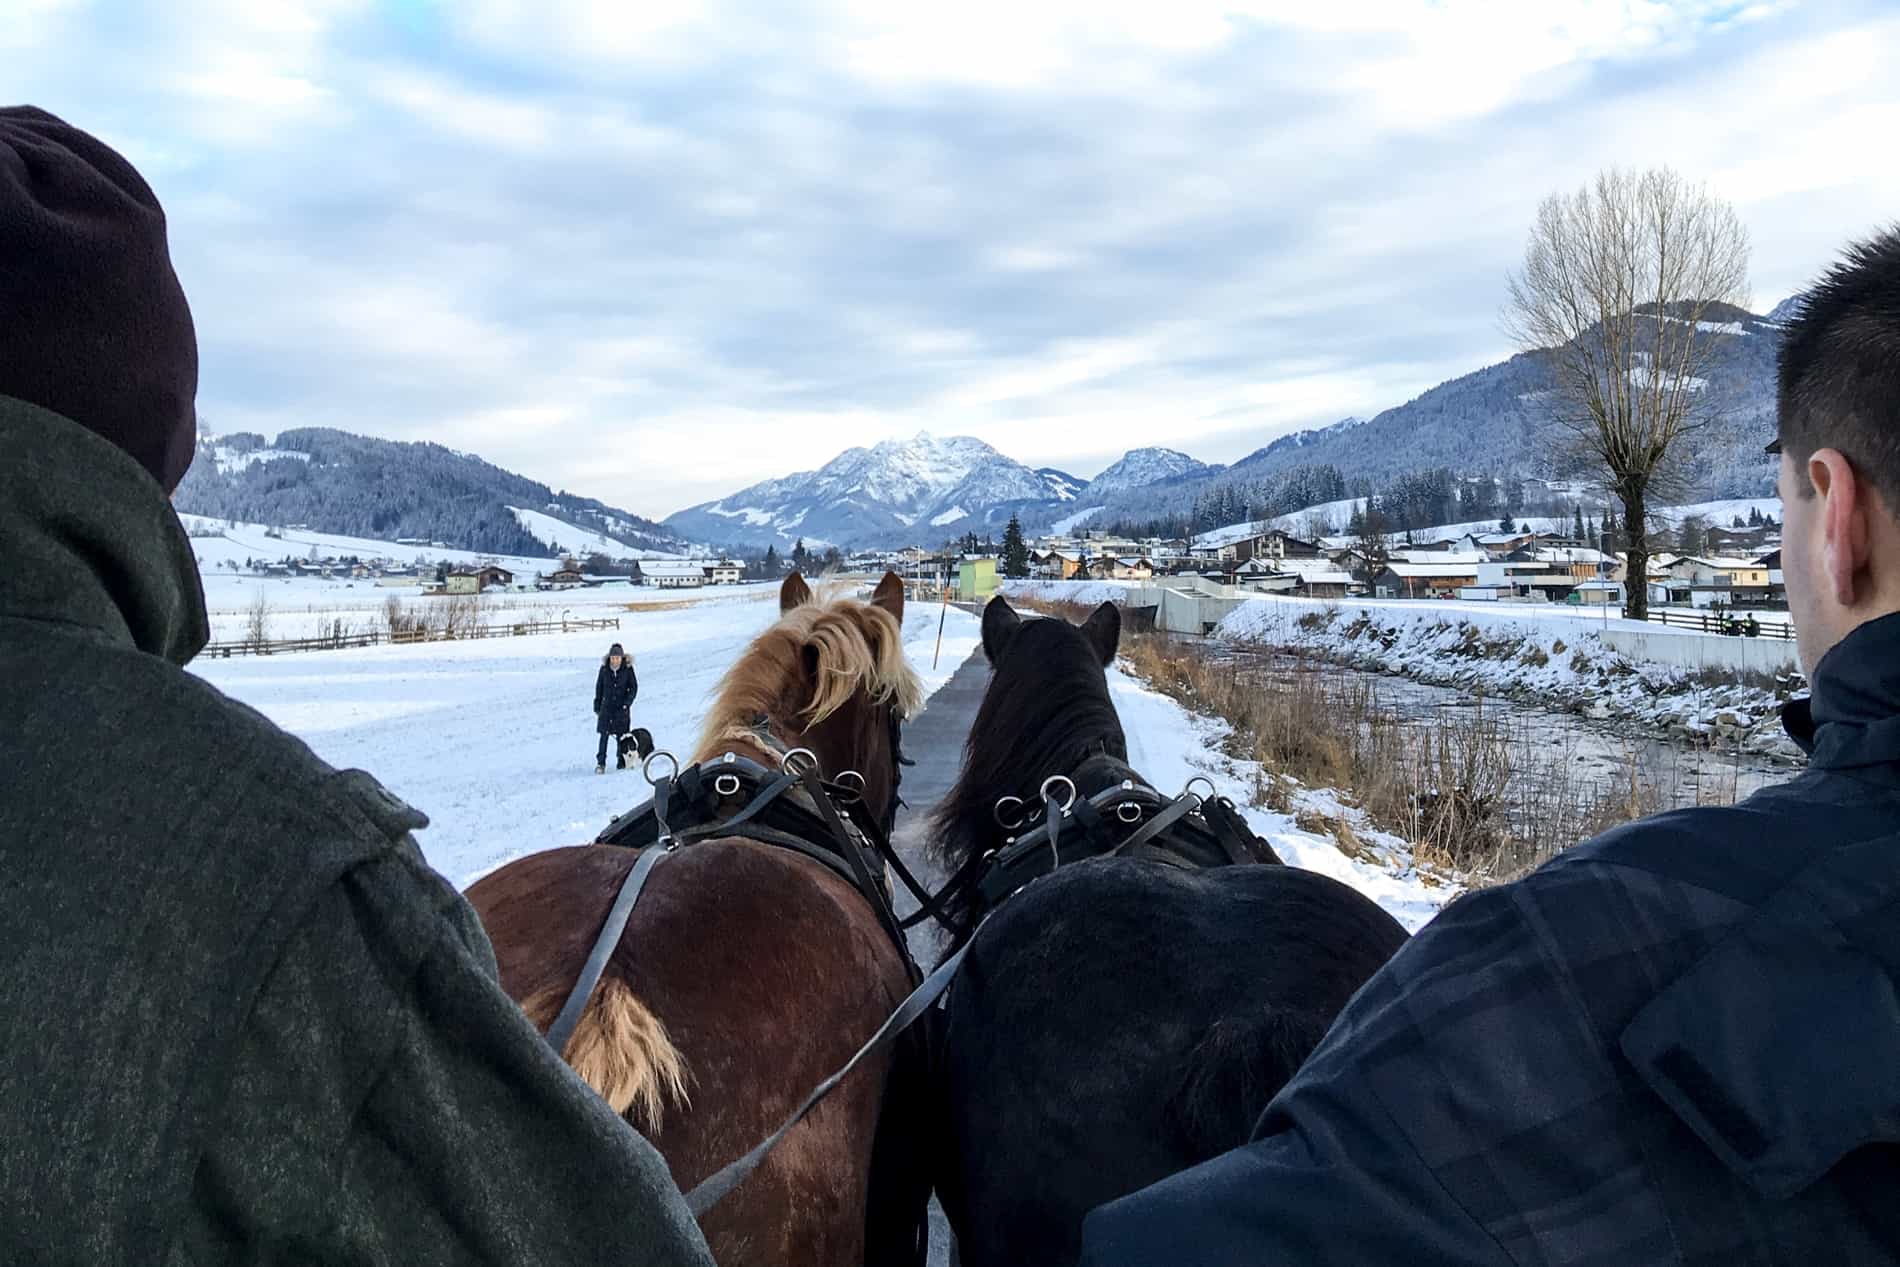 Two people ride a horse and cart through a snow coated Austrian village in winter. 